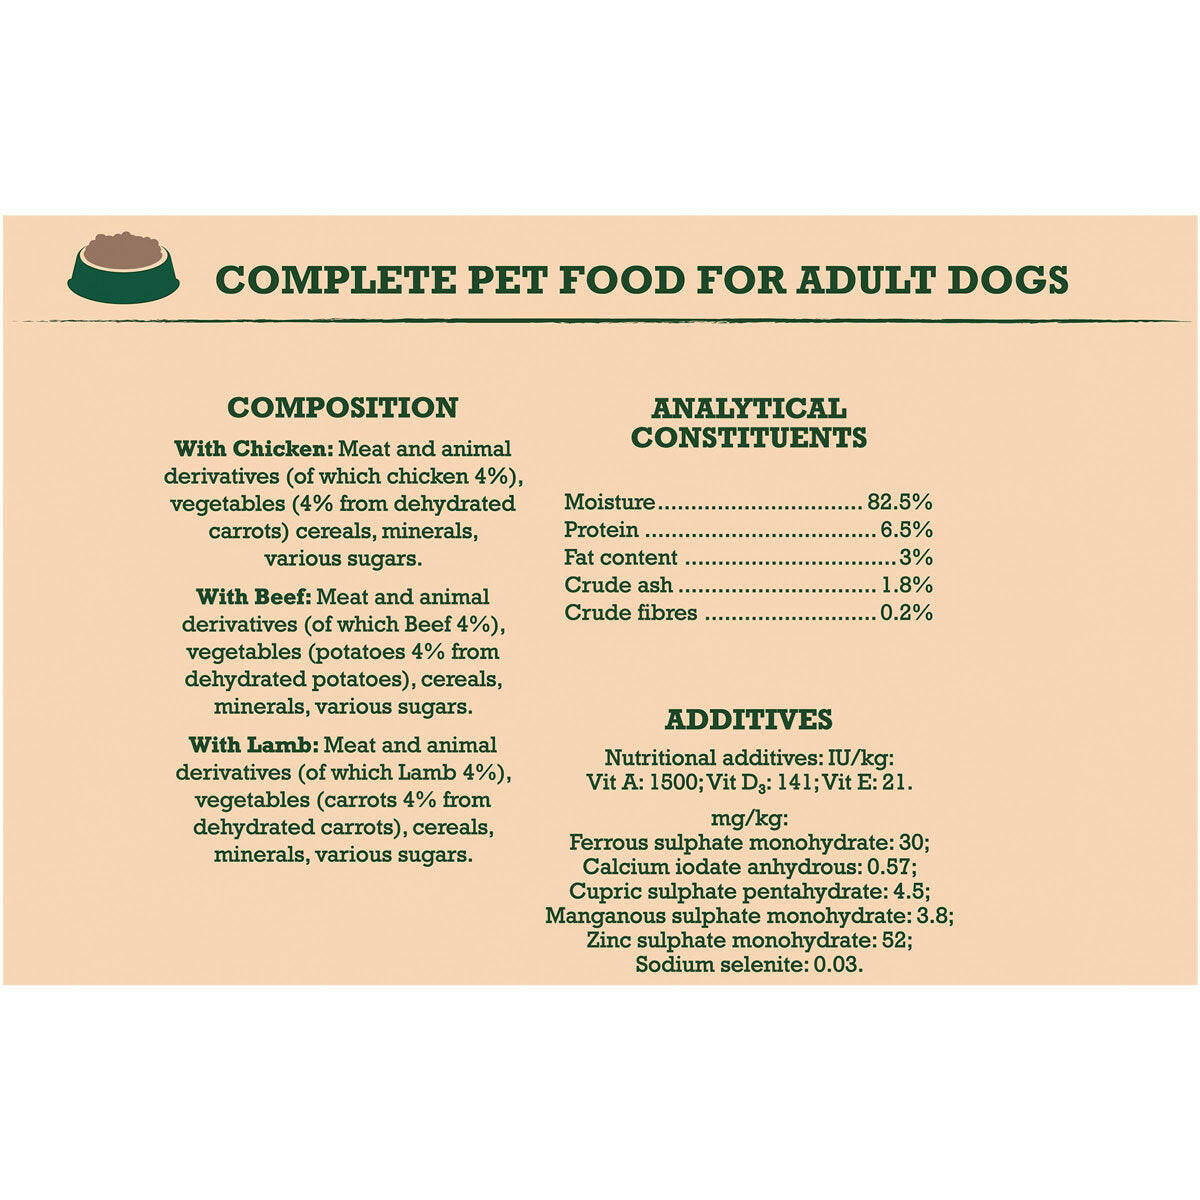 Winalot Variety Pack: Perfect Portions Dog Food in Gravy (40 Pouches x 100g)